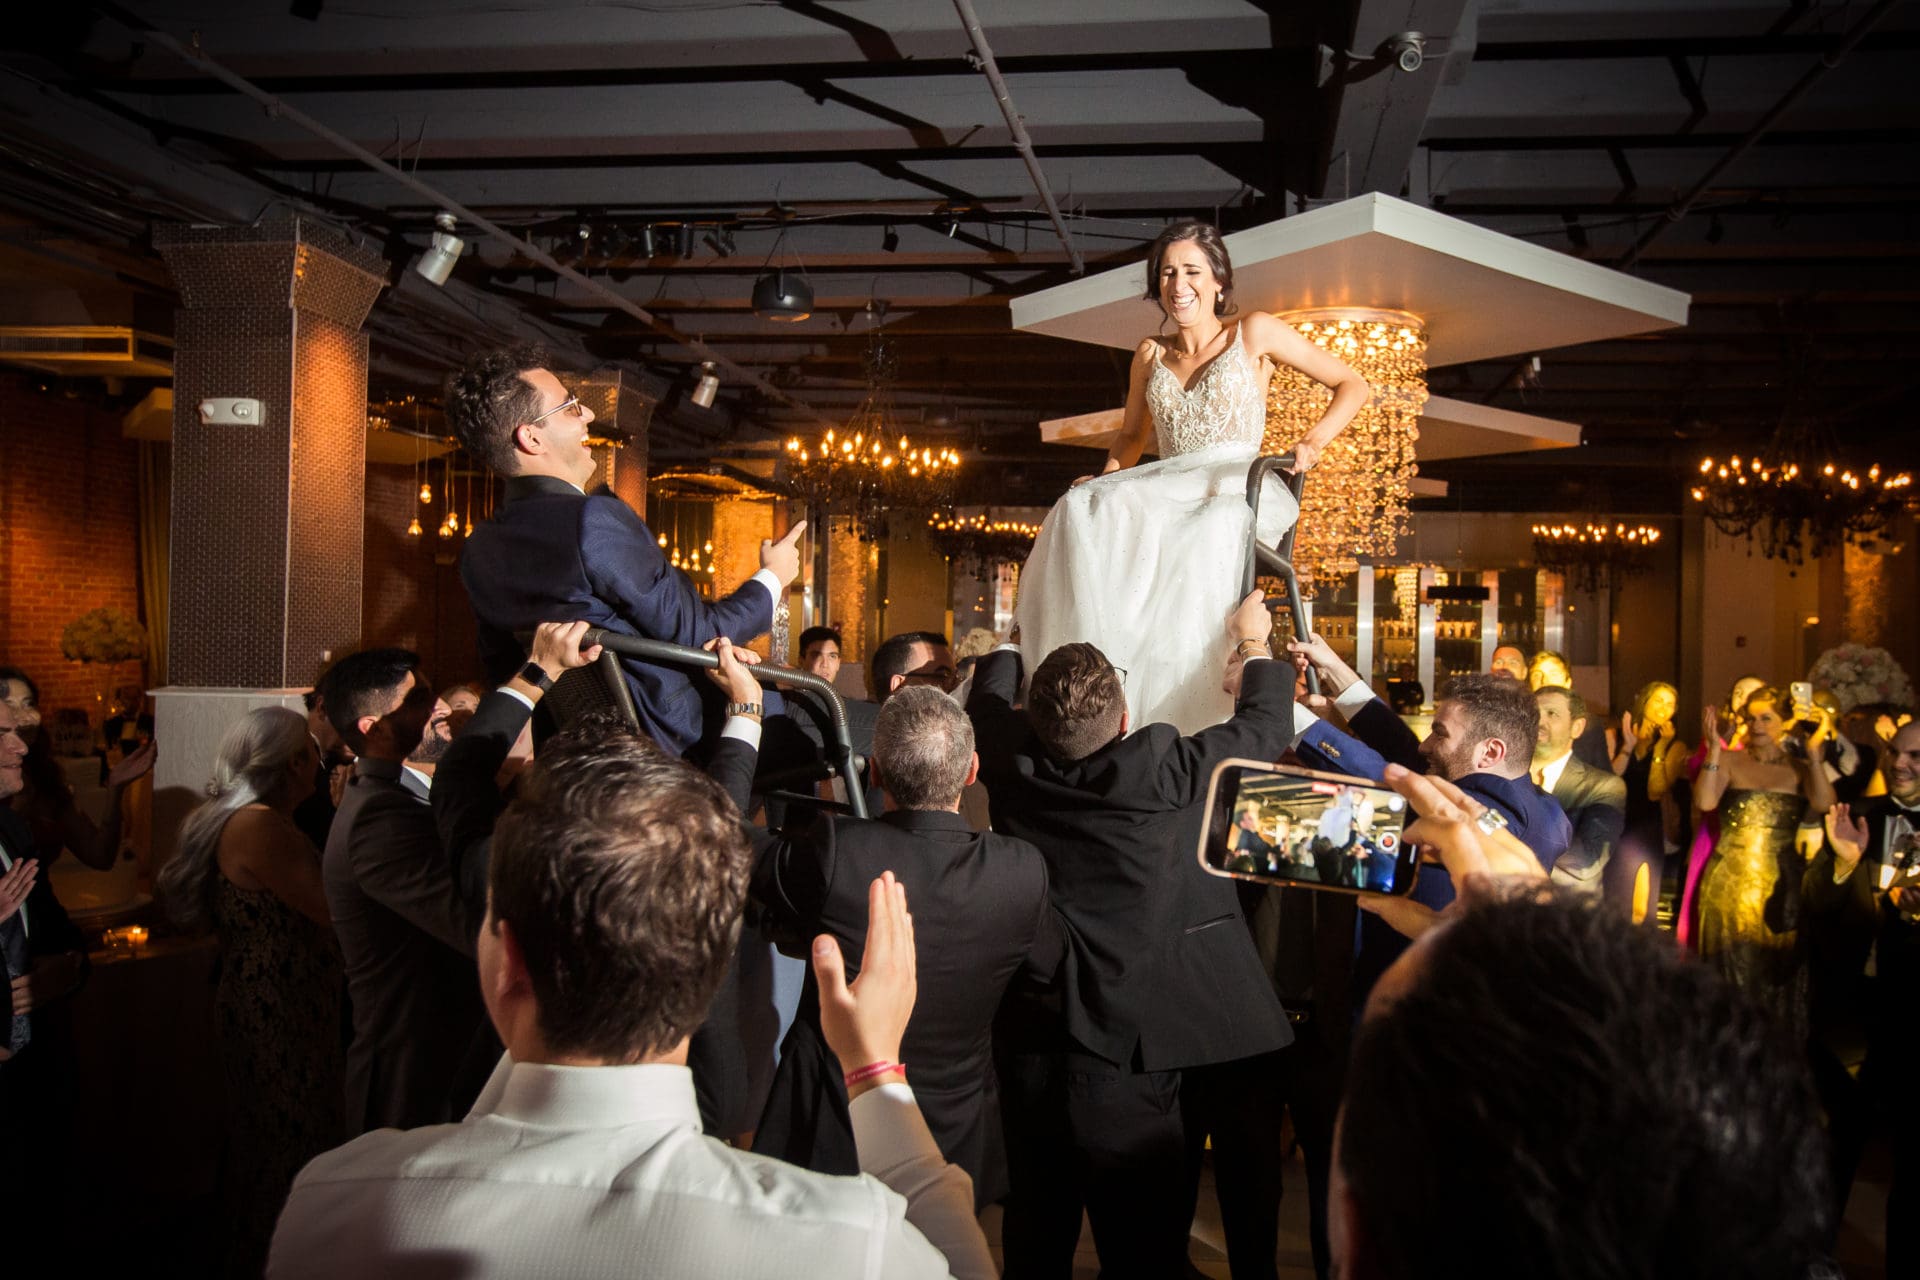 Bride and groom getting lifted up on chairs during the reception